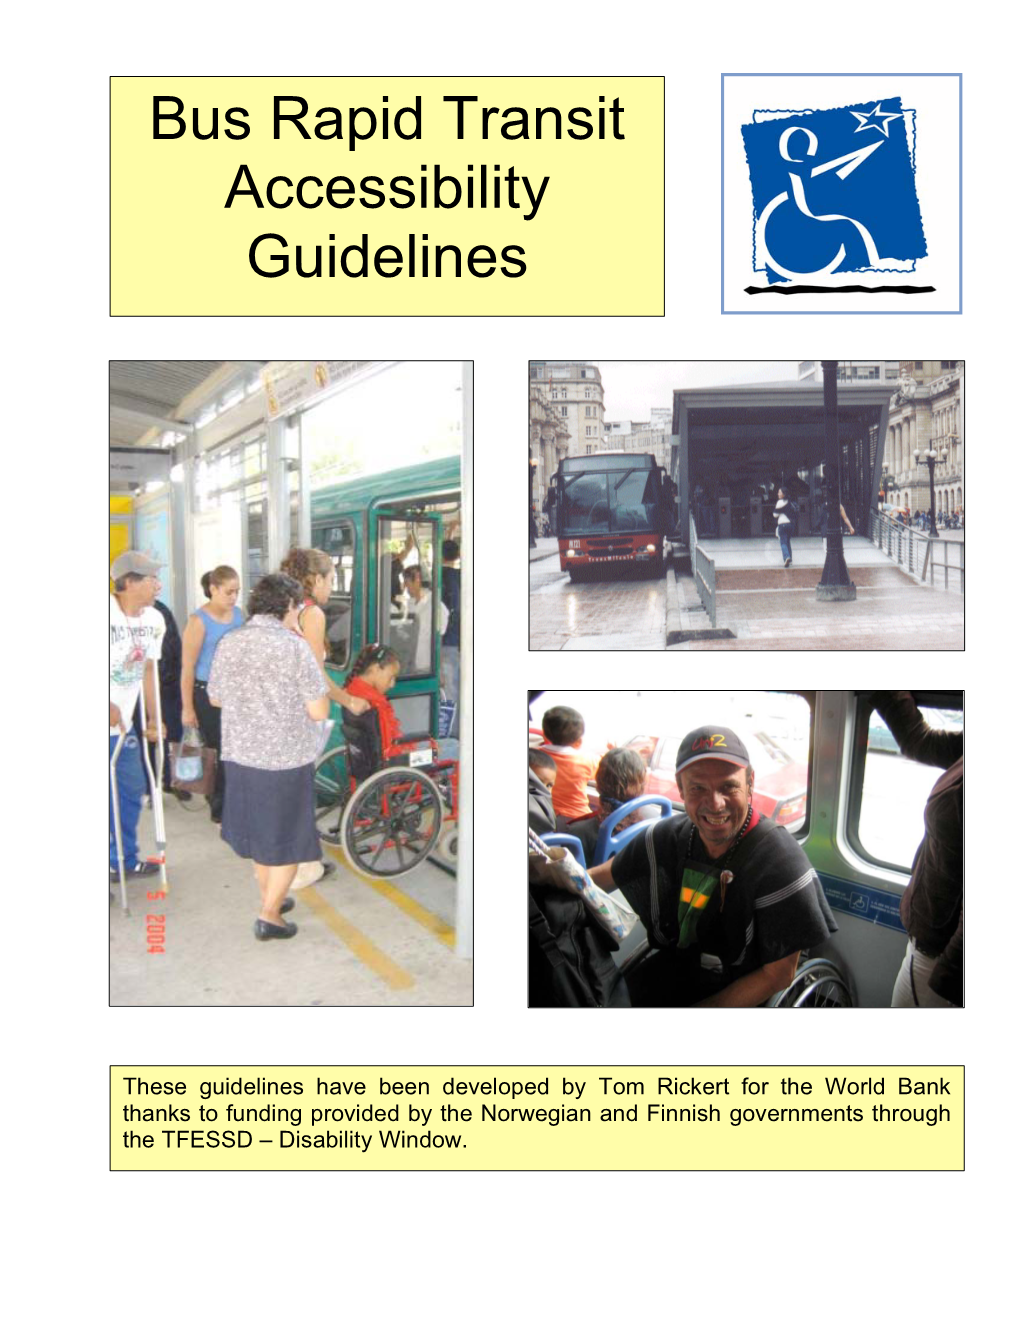 Bus Rapid Transit Accessibility Guidelines” in the Search Box to Download This Guide